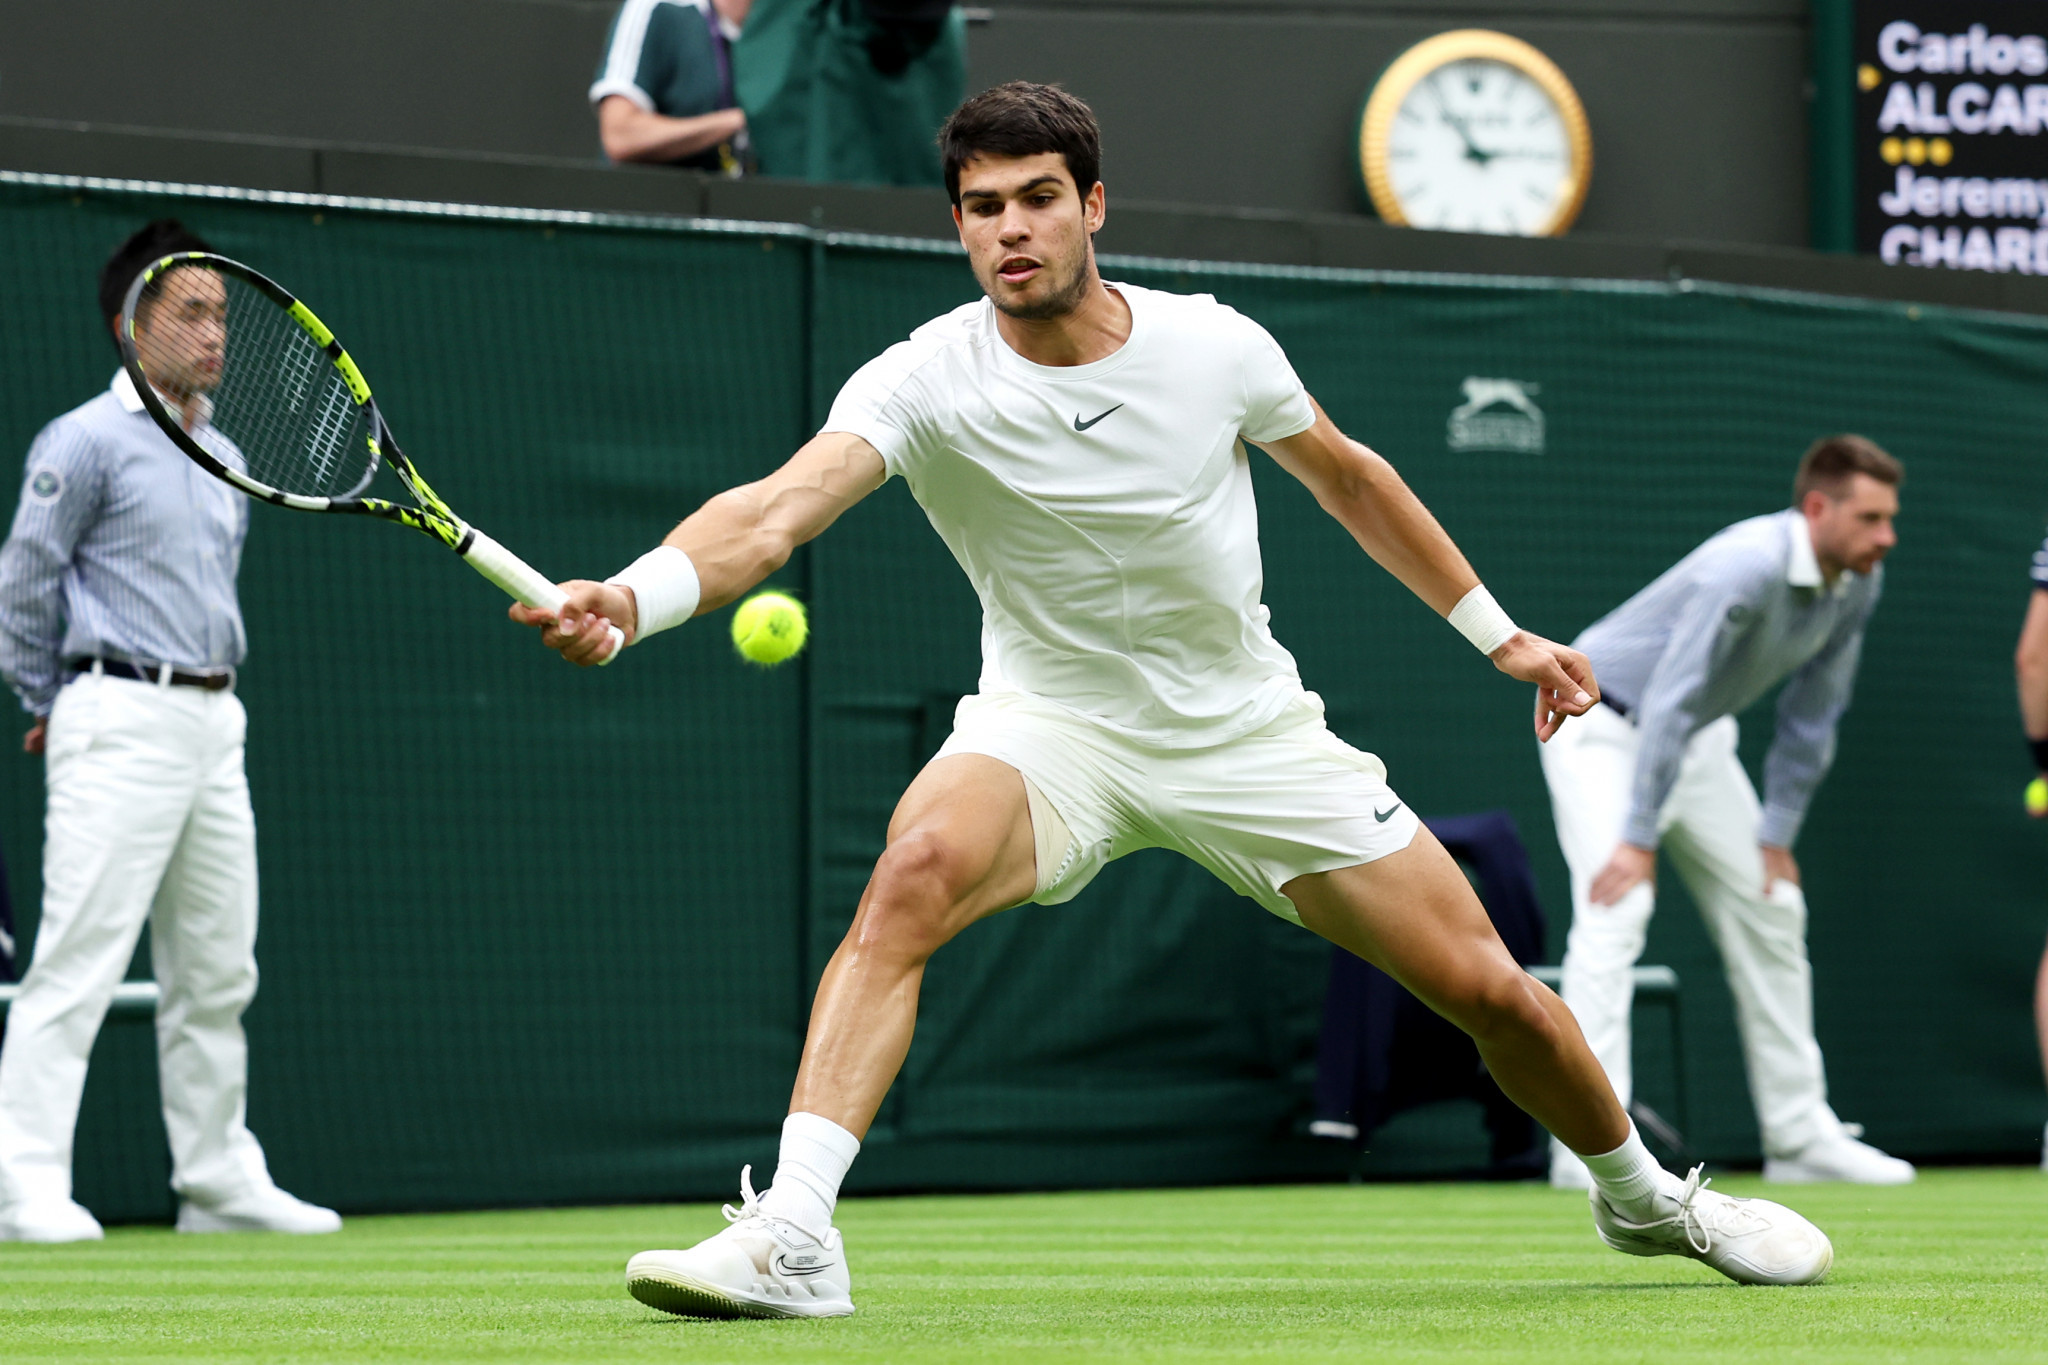 Men's top seed Carlos Alcaraz started his Wimbledon campaign with a straight sets win over Jeremy Chardy ©Getty Images 